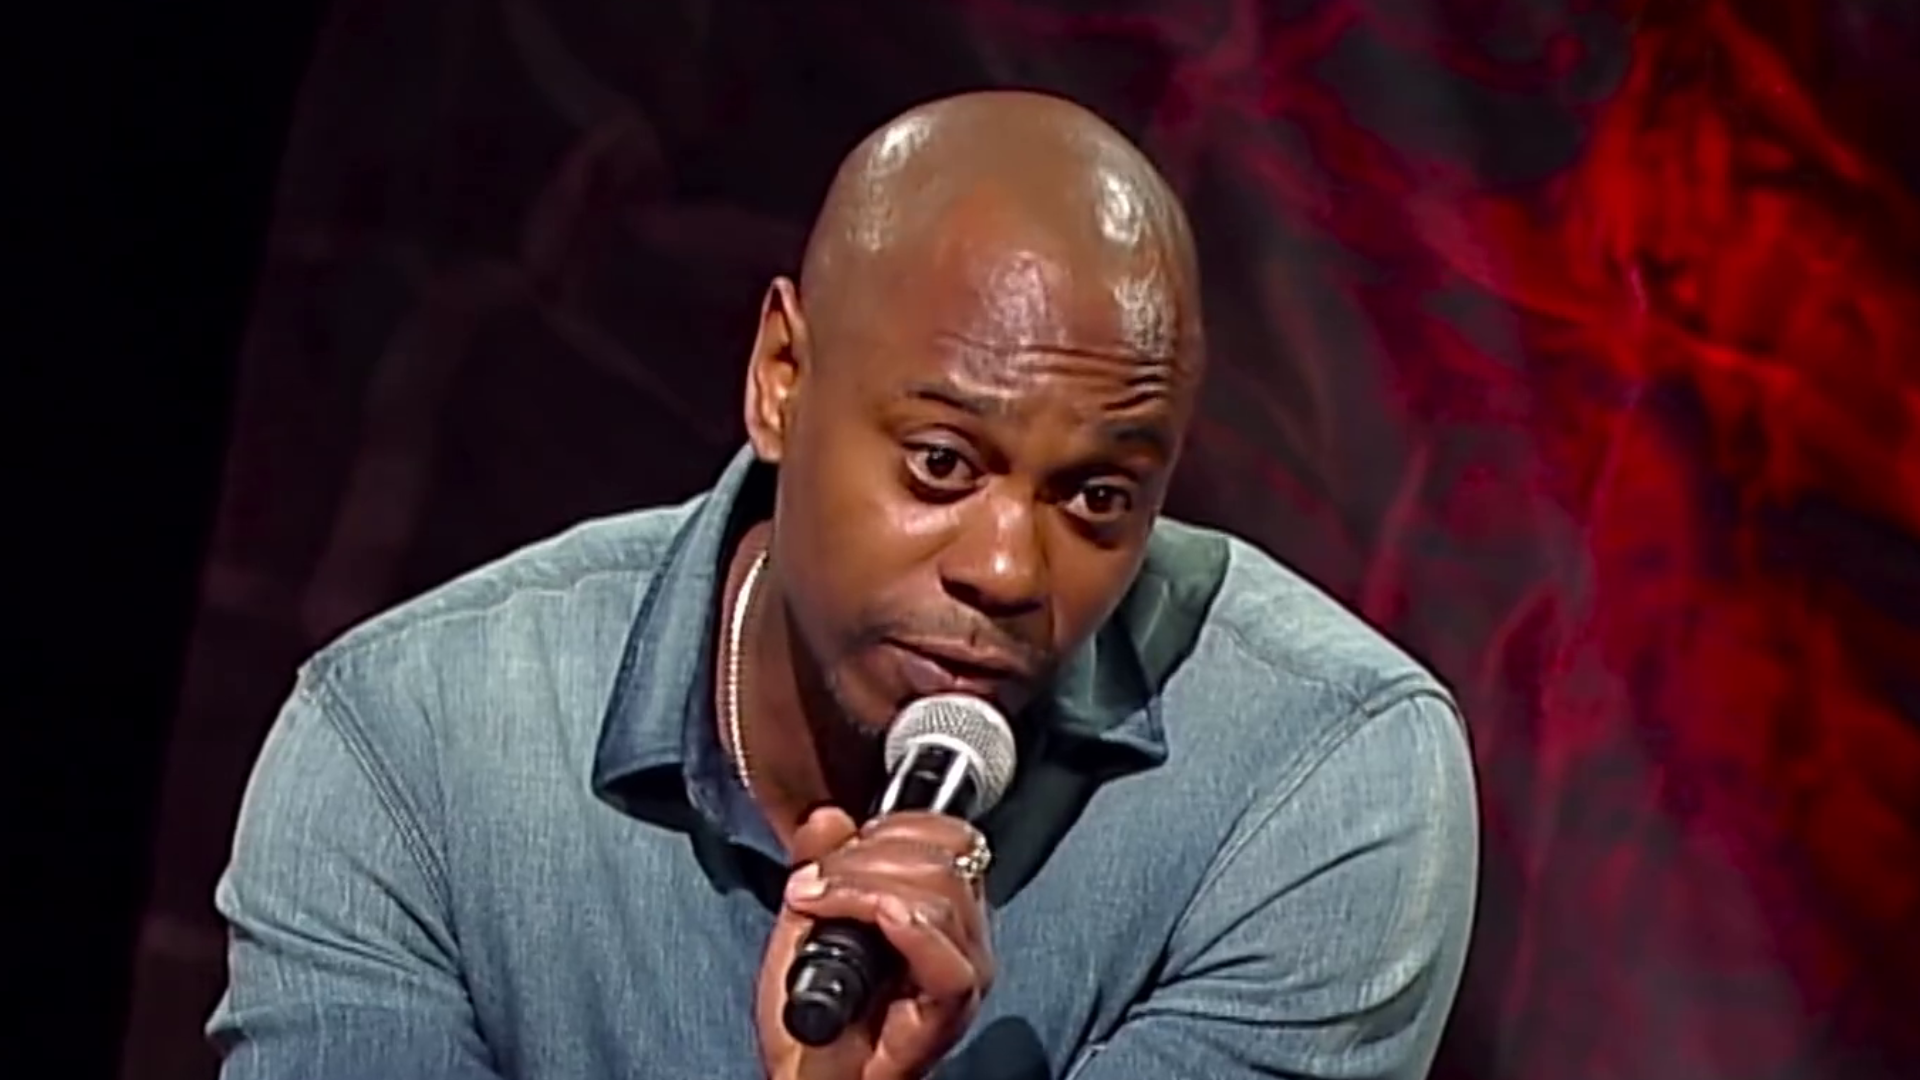 Dave Chappelle Reacts to On-Stage Ambush: ‘I Felt Good My Friends Broke His Arm’